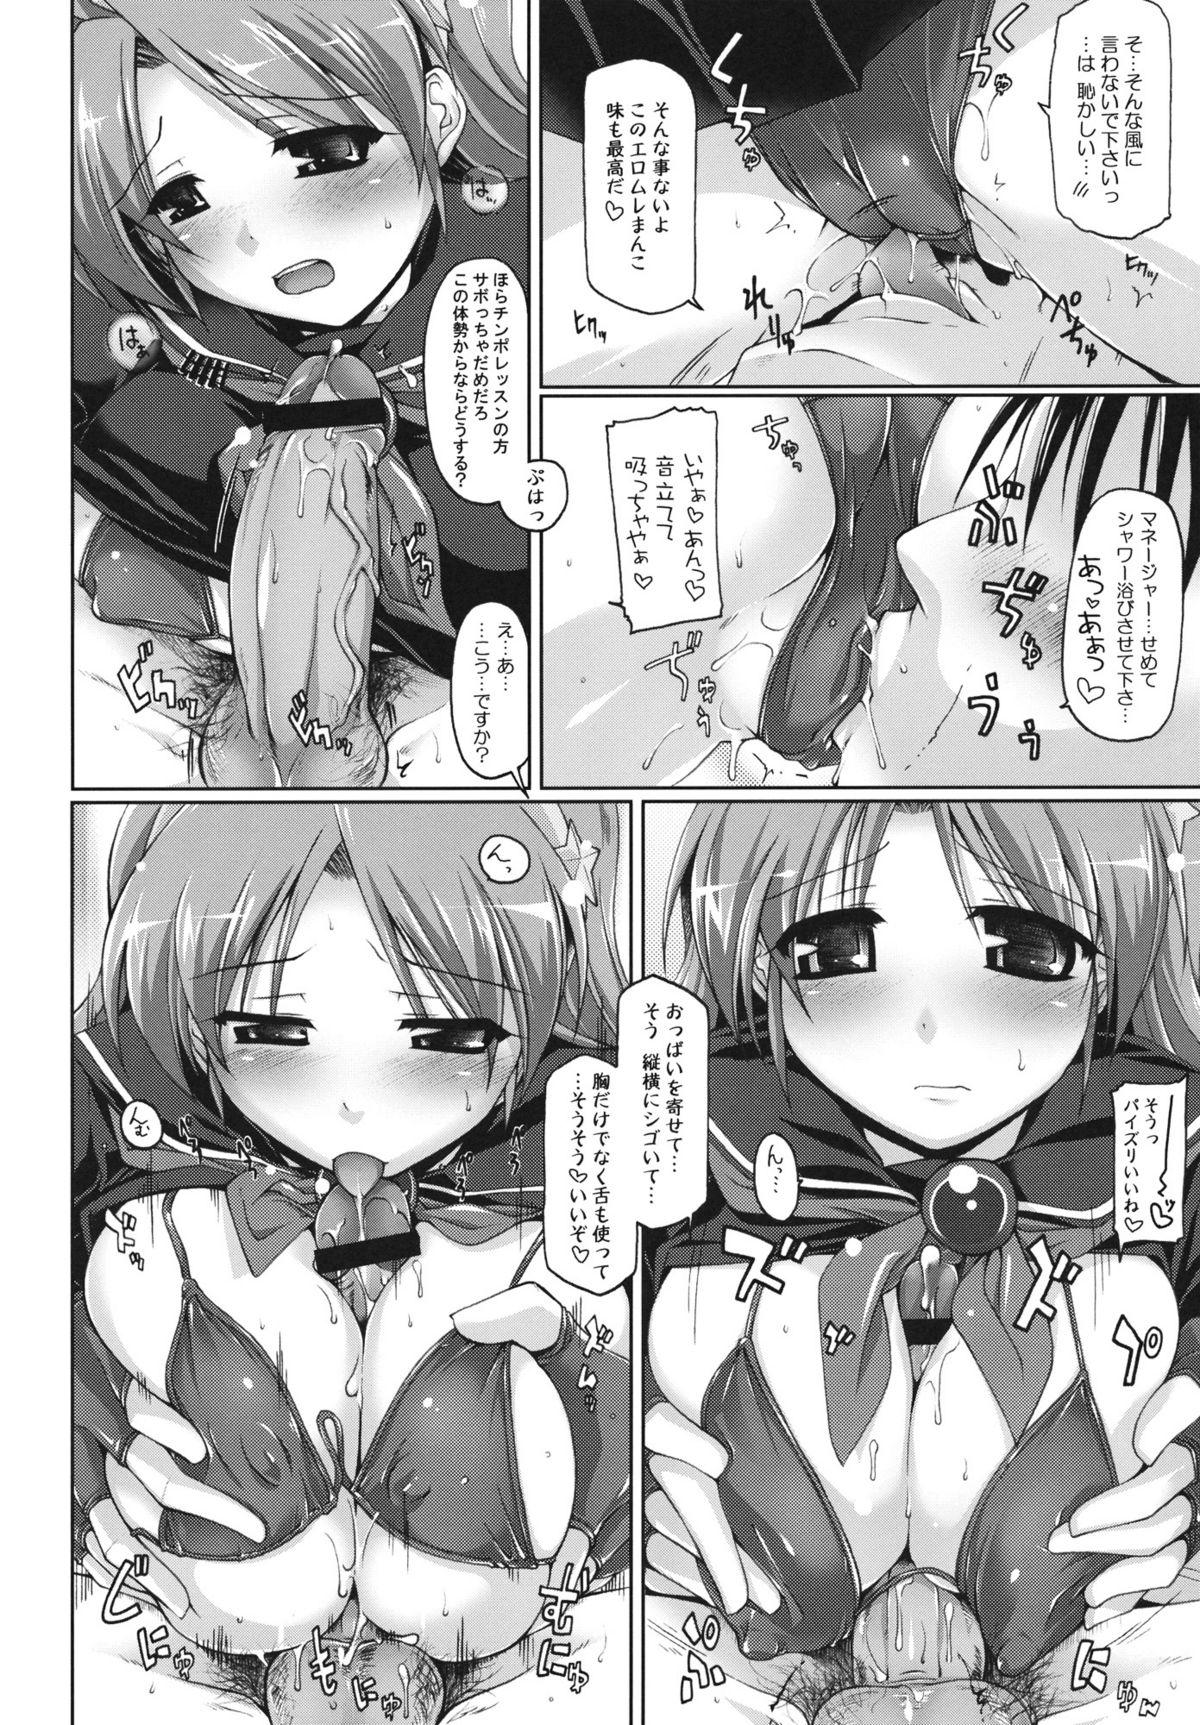 Cheating Wife LOVE&GAME - King of fighters Lesbiansex - Page 5